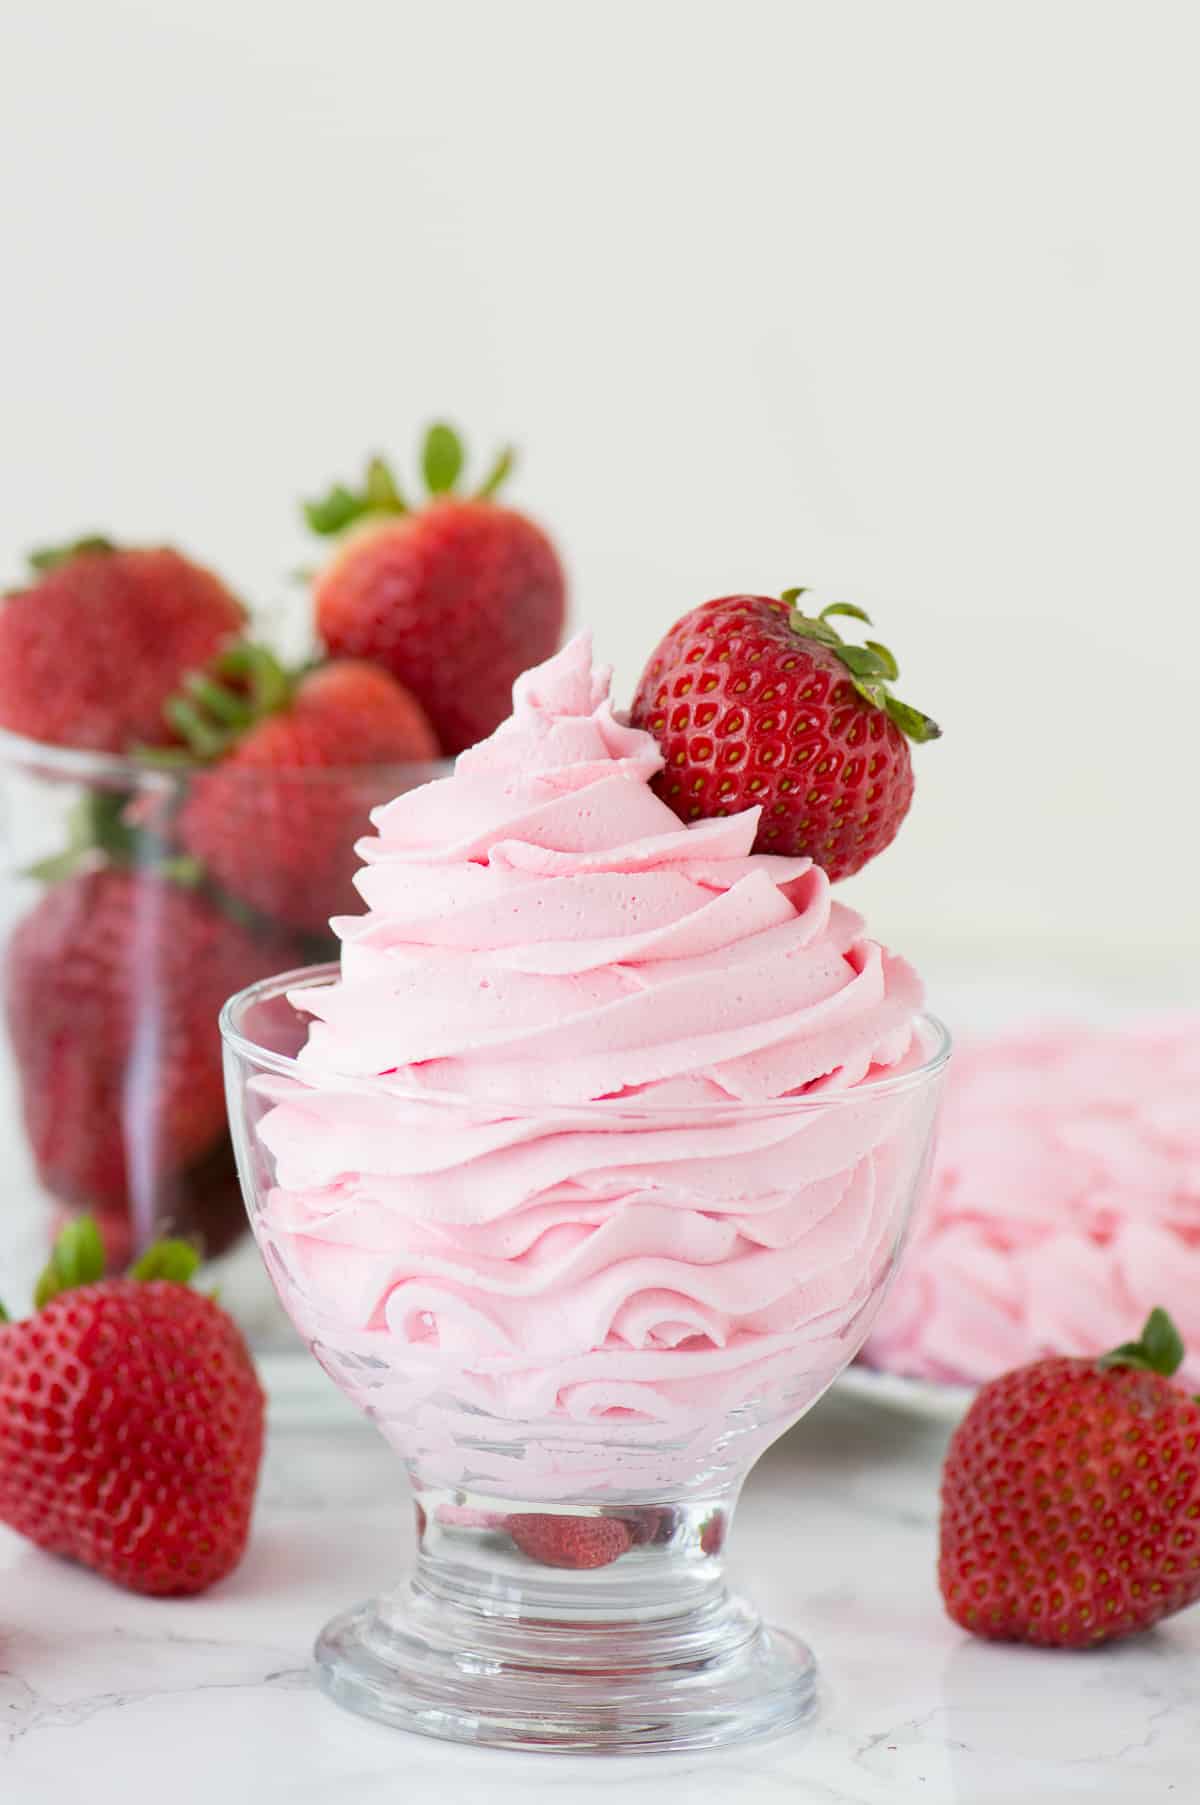 Homemade strawberry whipped cream using only 3 ingredients!